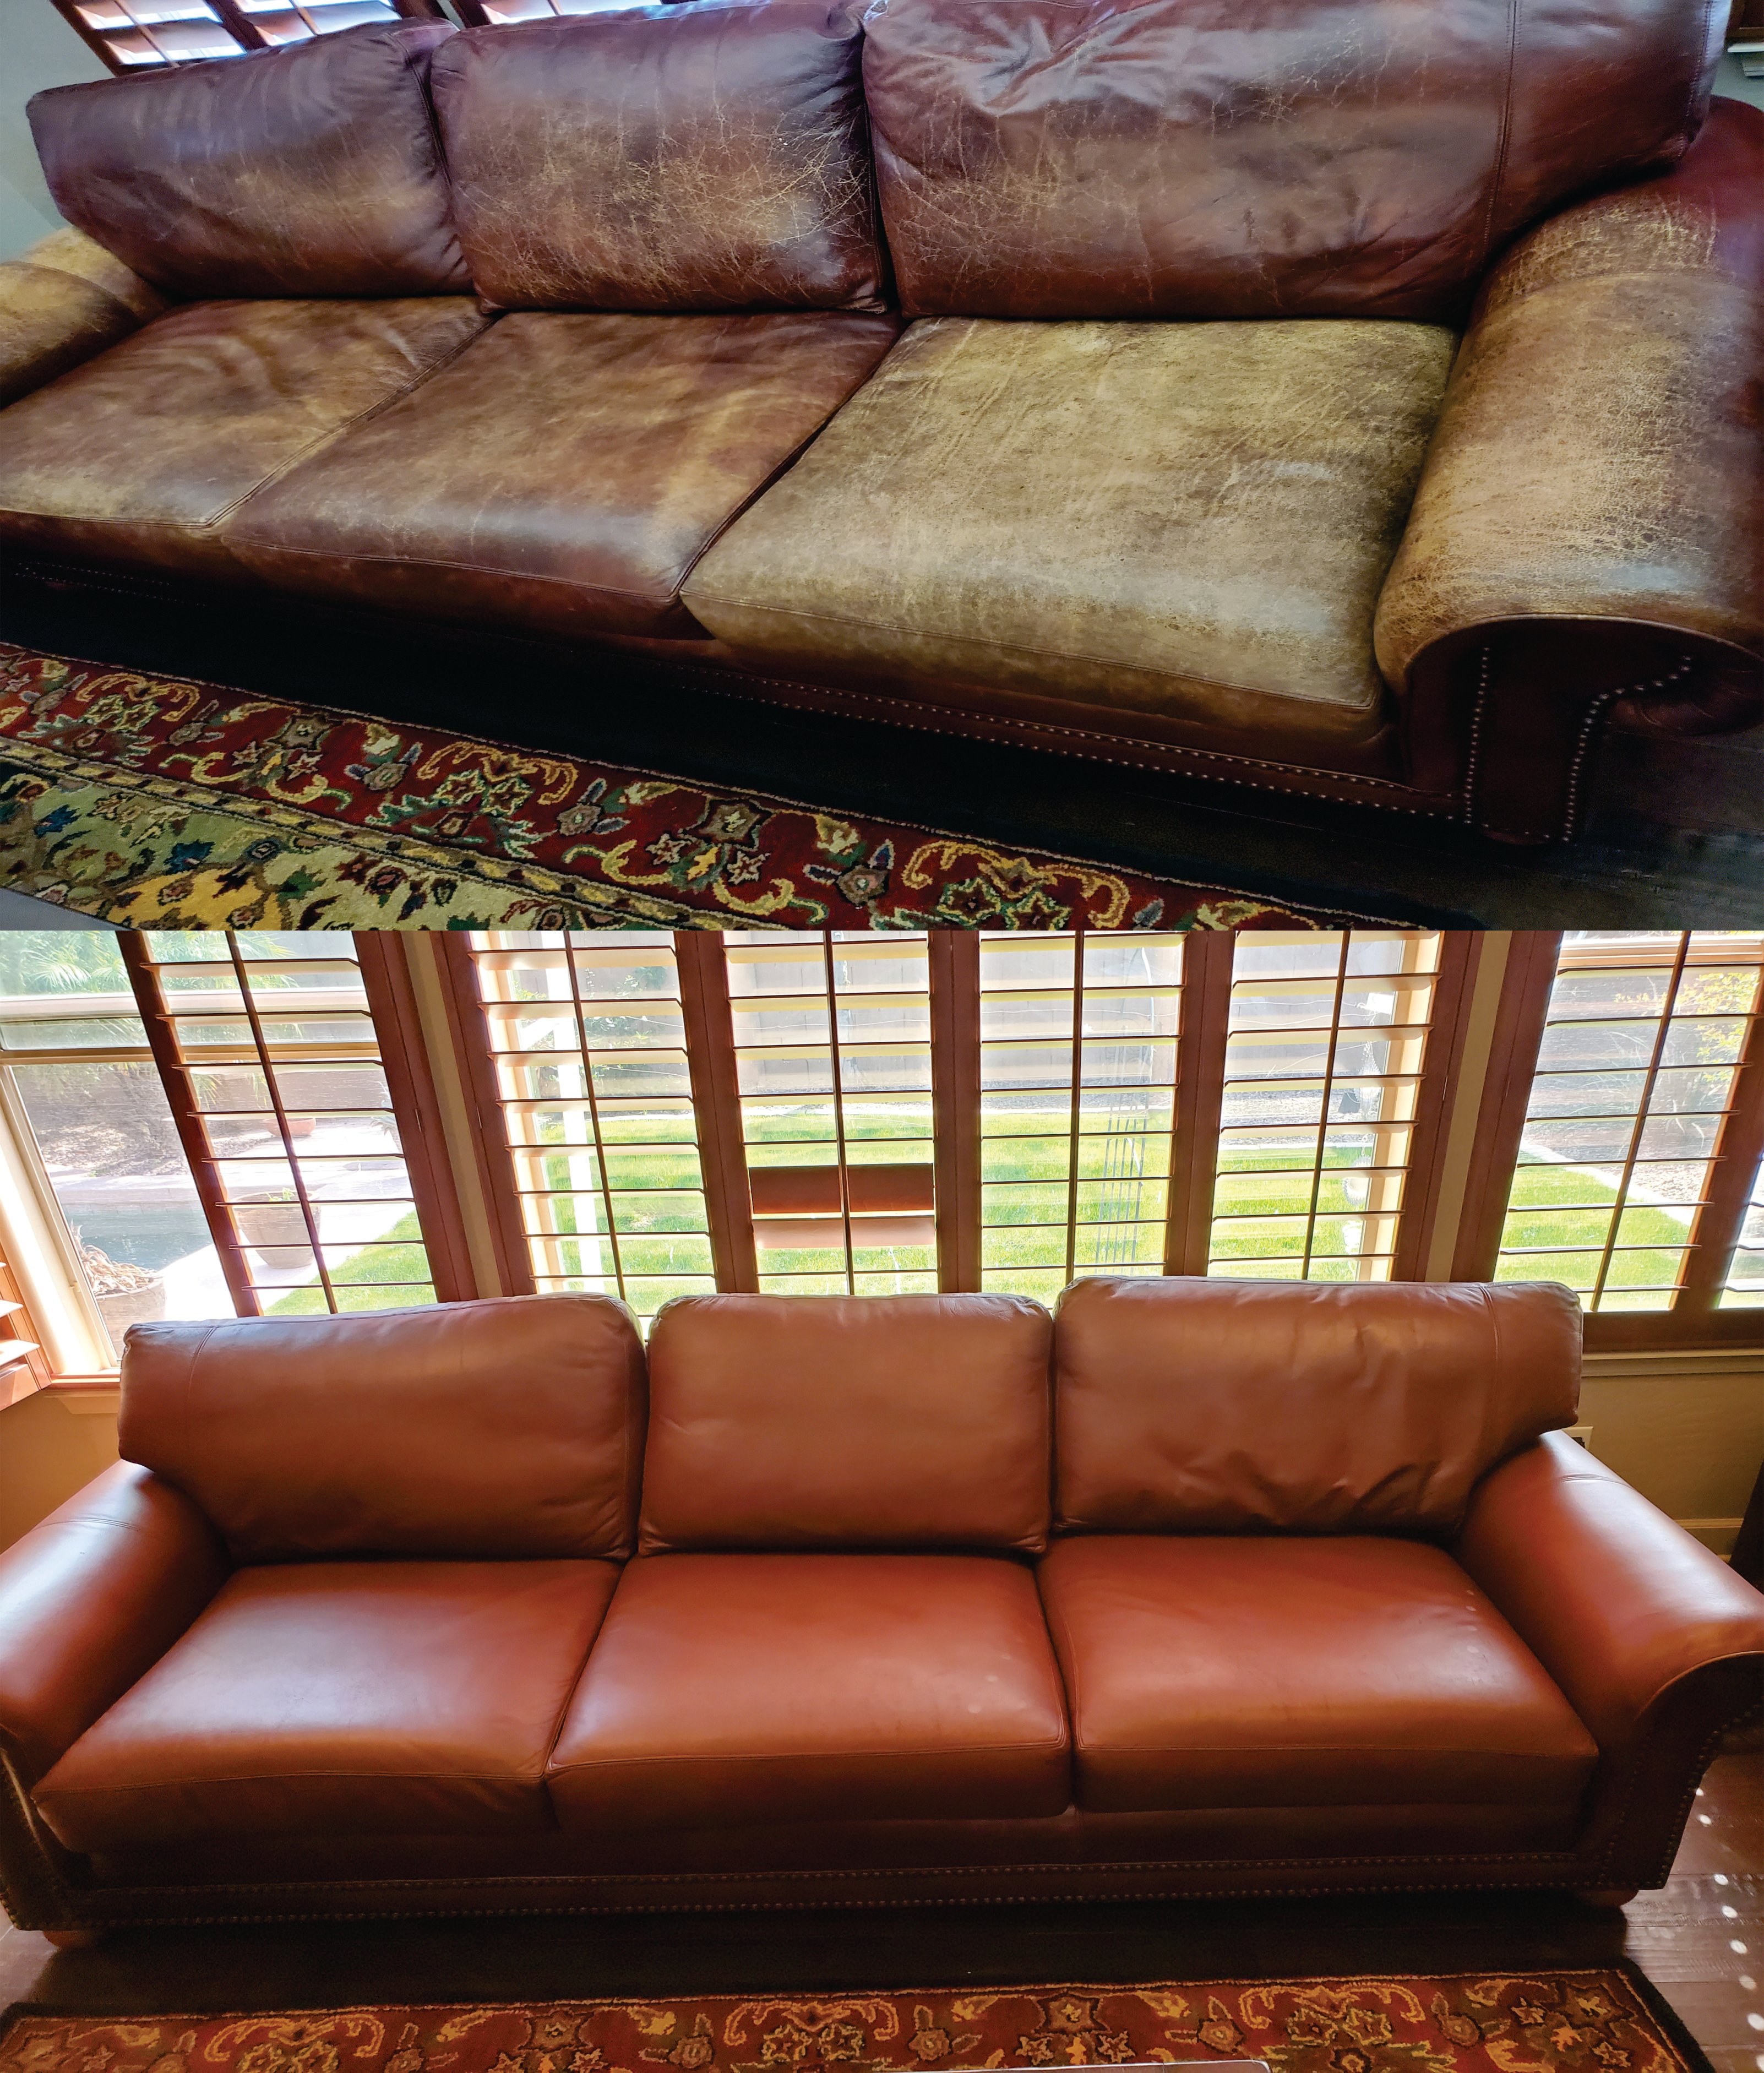 Restuffing Leather Couch Cushions and Foam Replacement